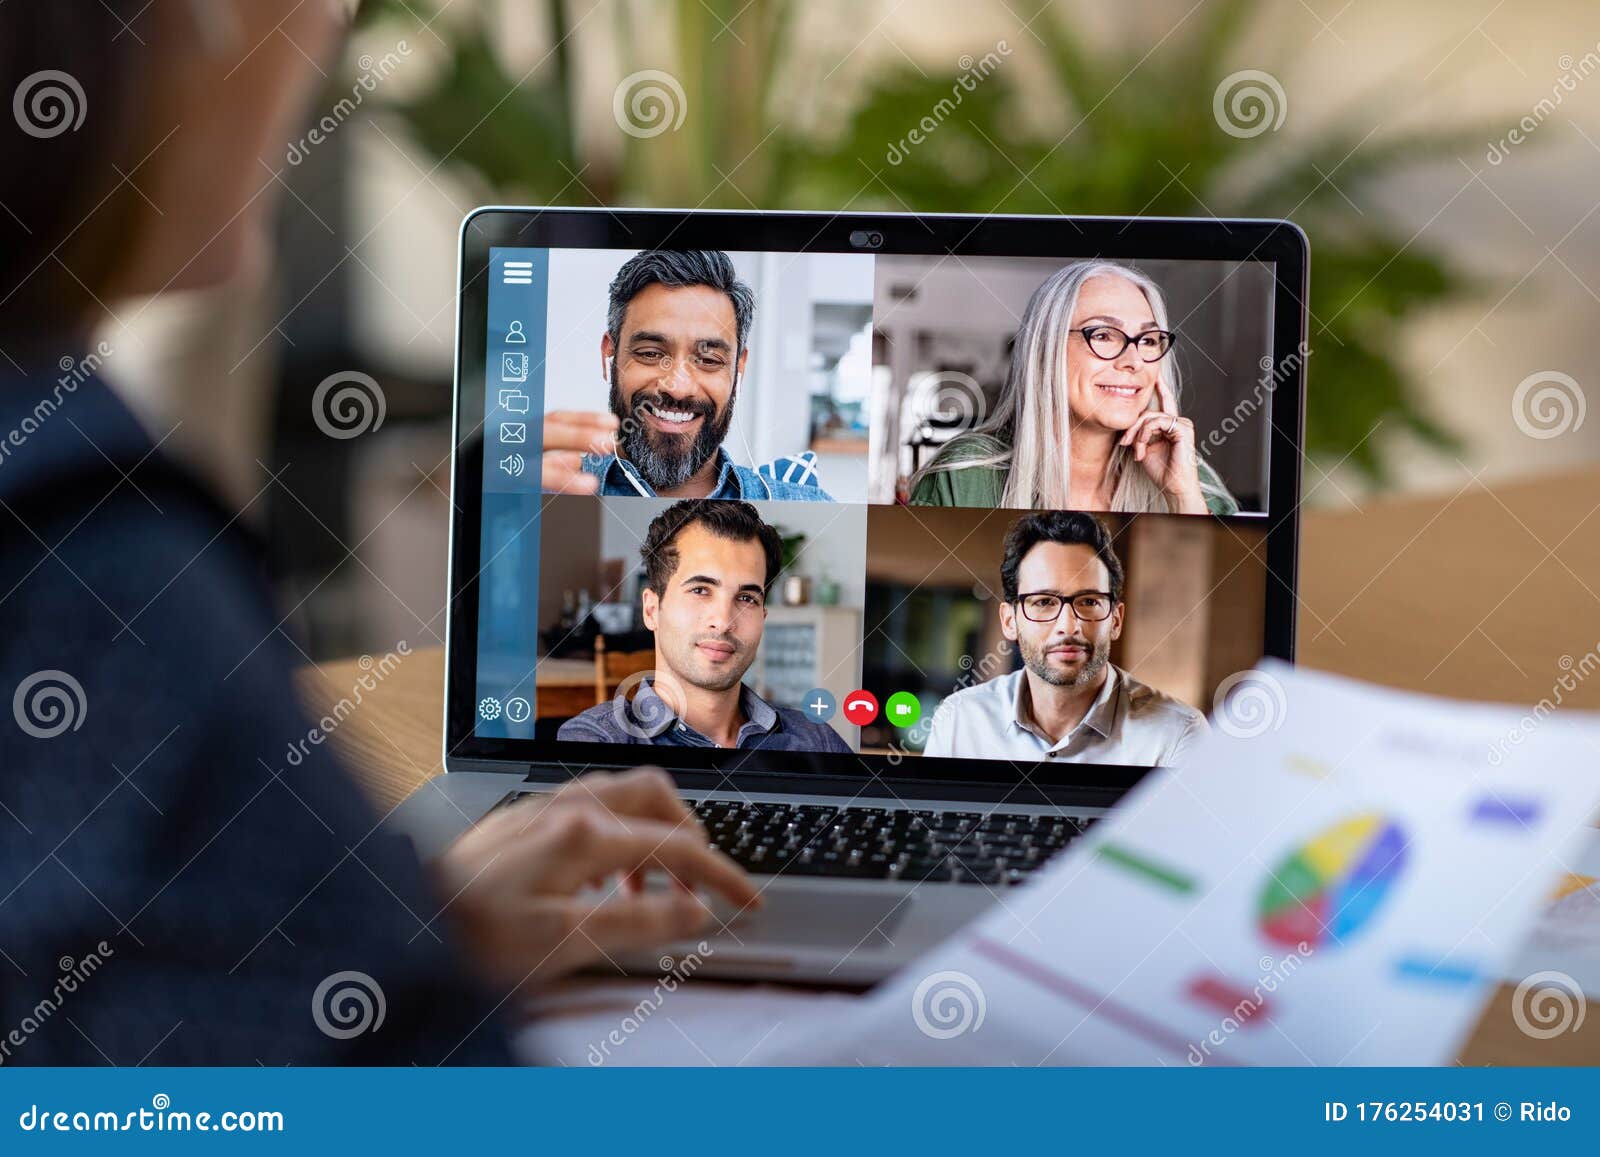 smart working and video conference